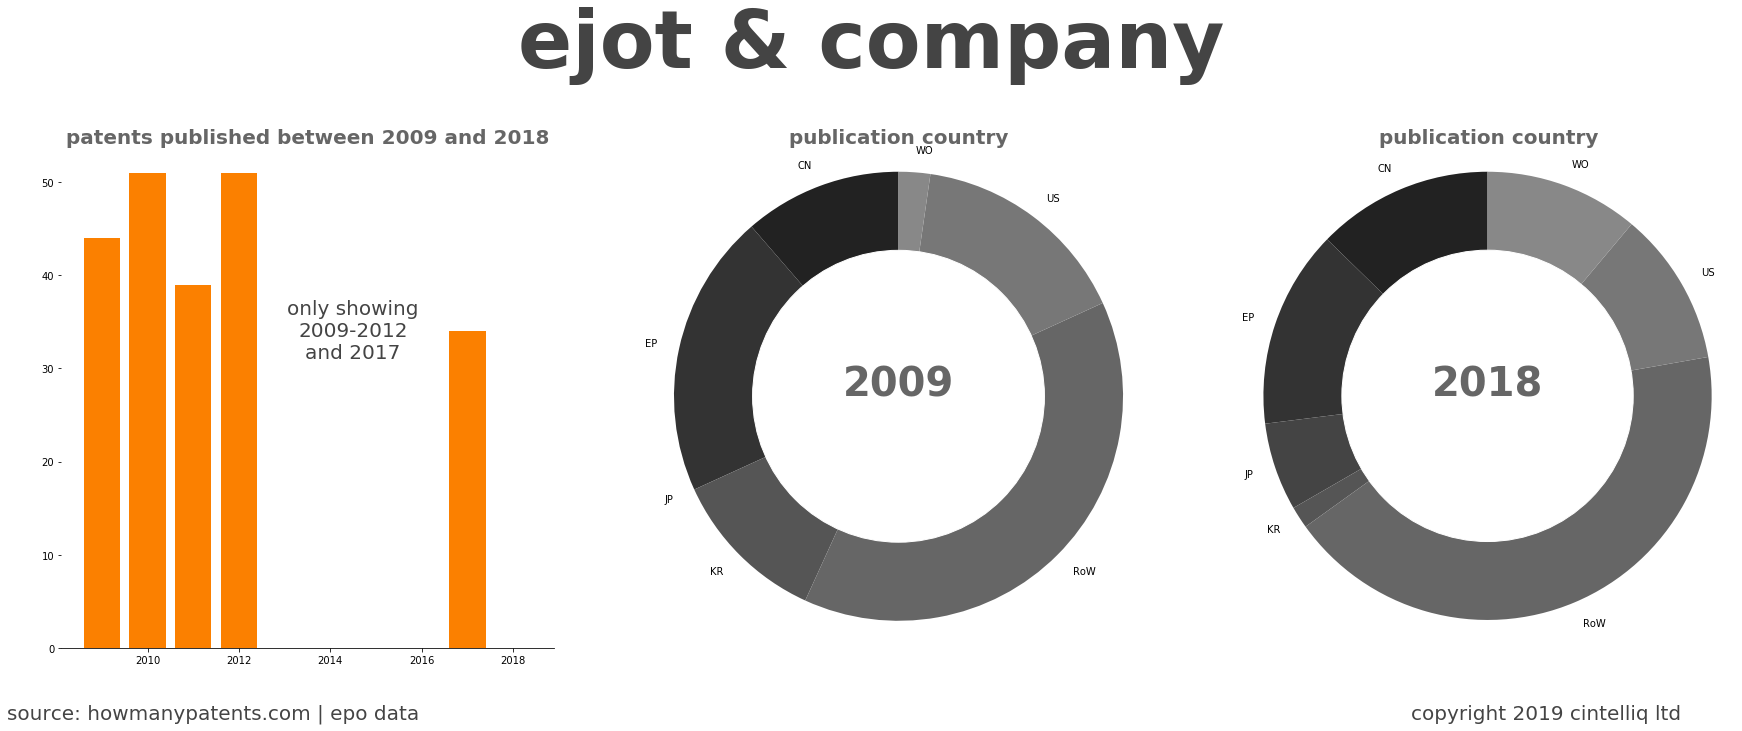 summary of patents for Ejot & Company